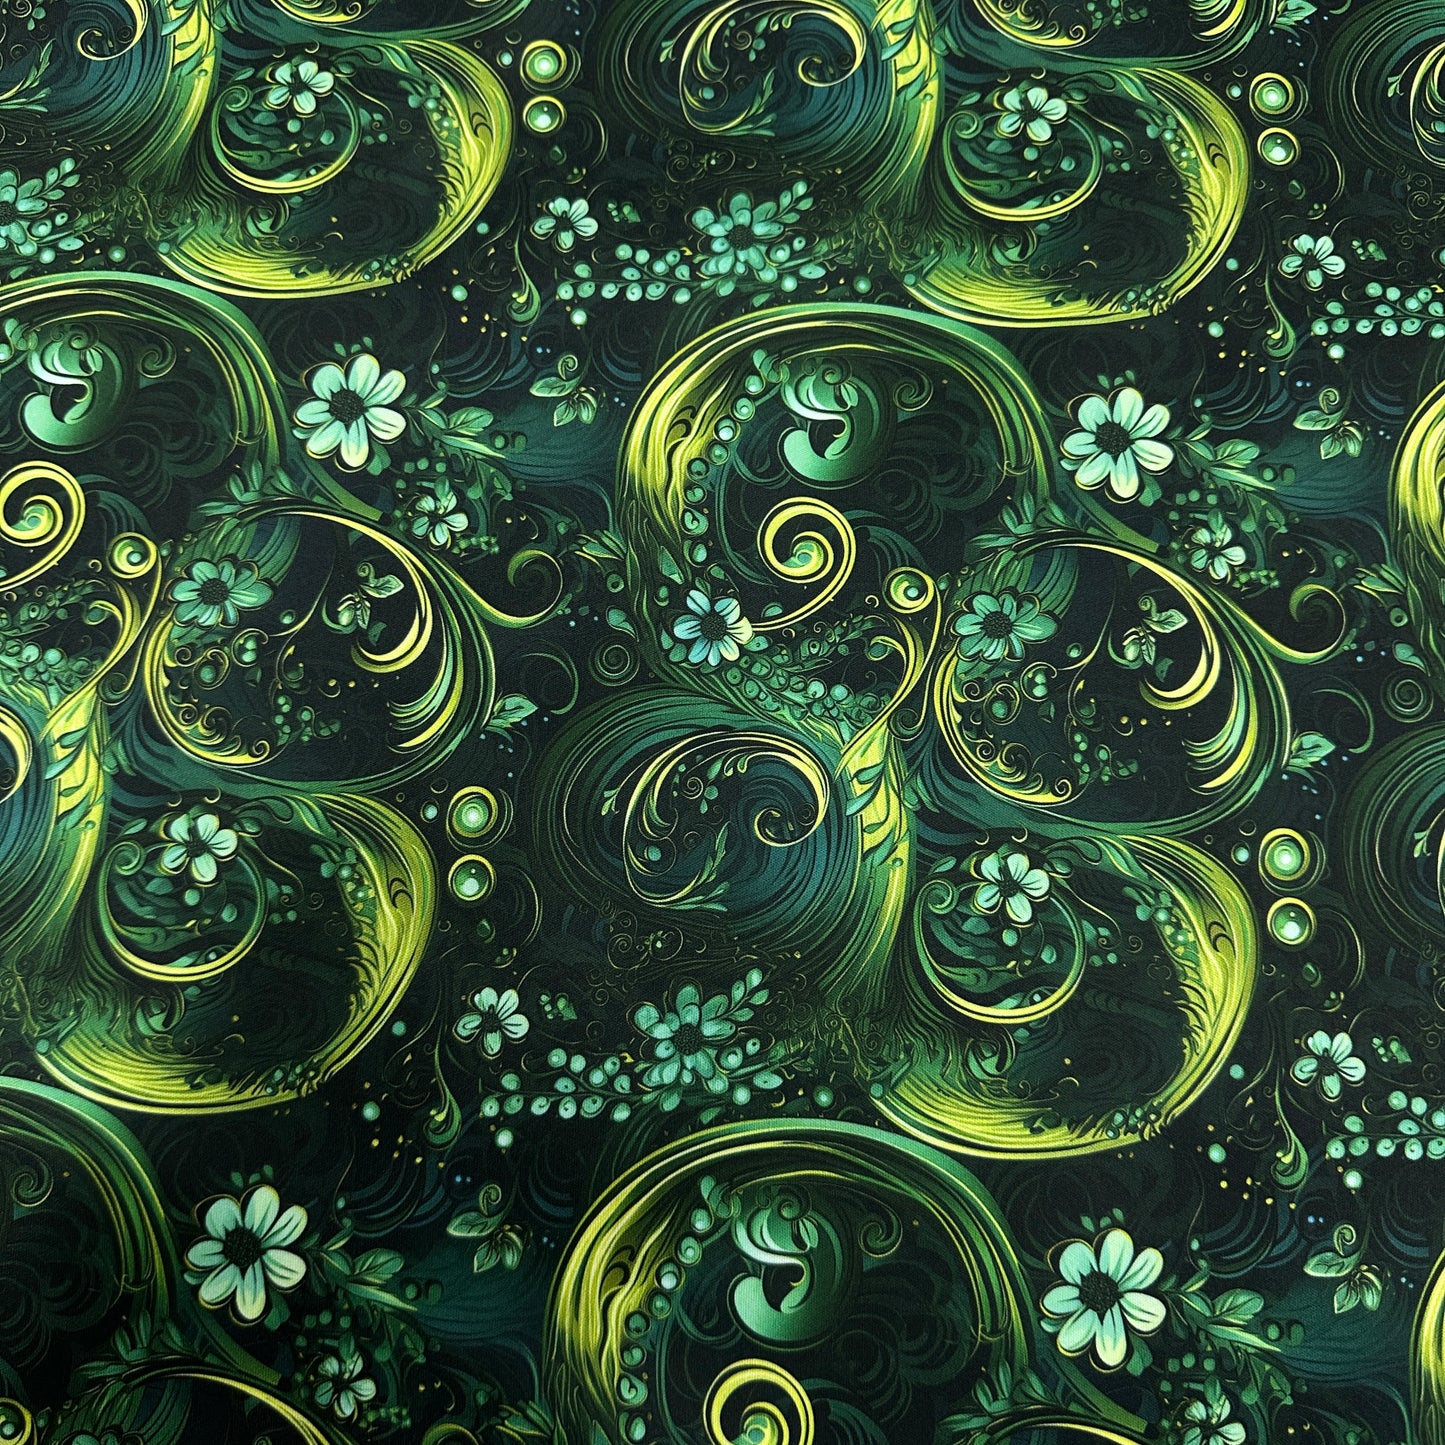 Green Flowery Swirls 1 mil PUL Fabric - Made in the USA